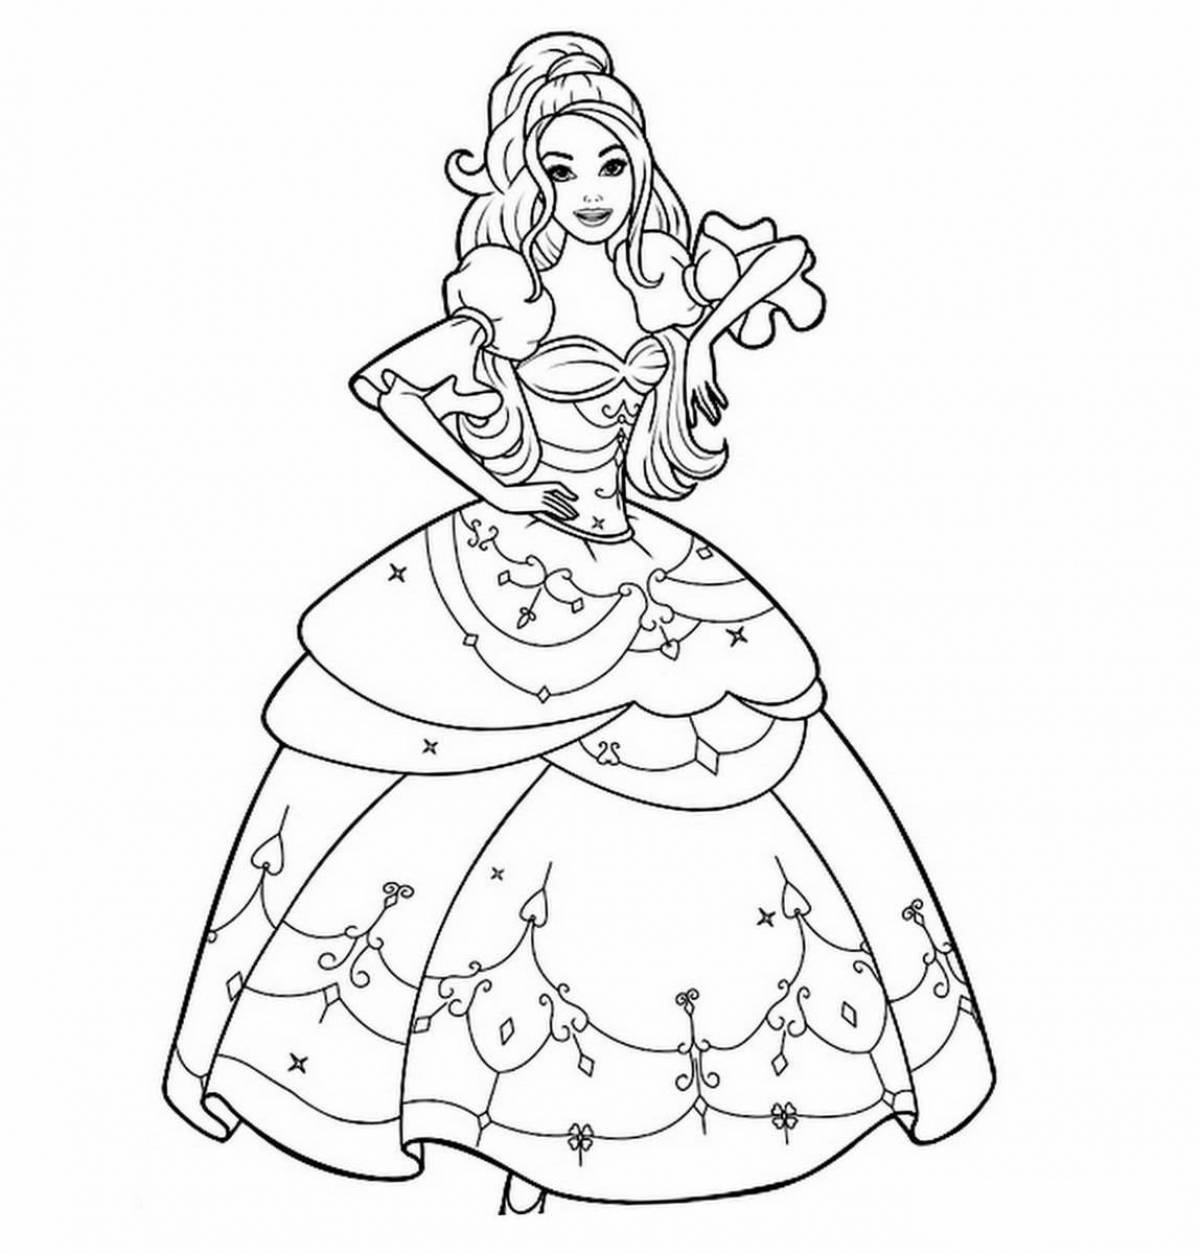 Majestic princess coloring pages in beautiful dresses